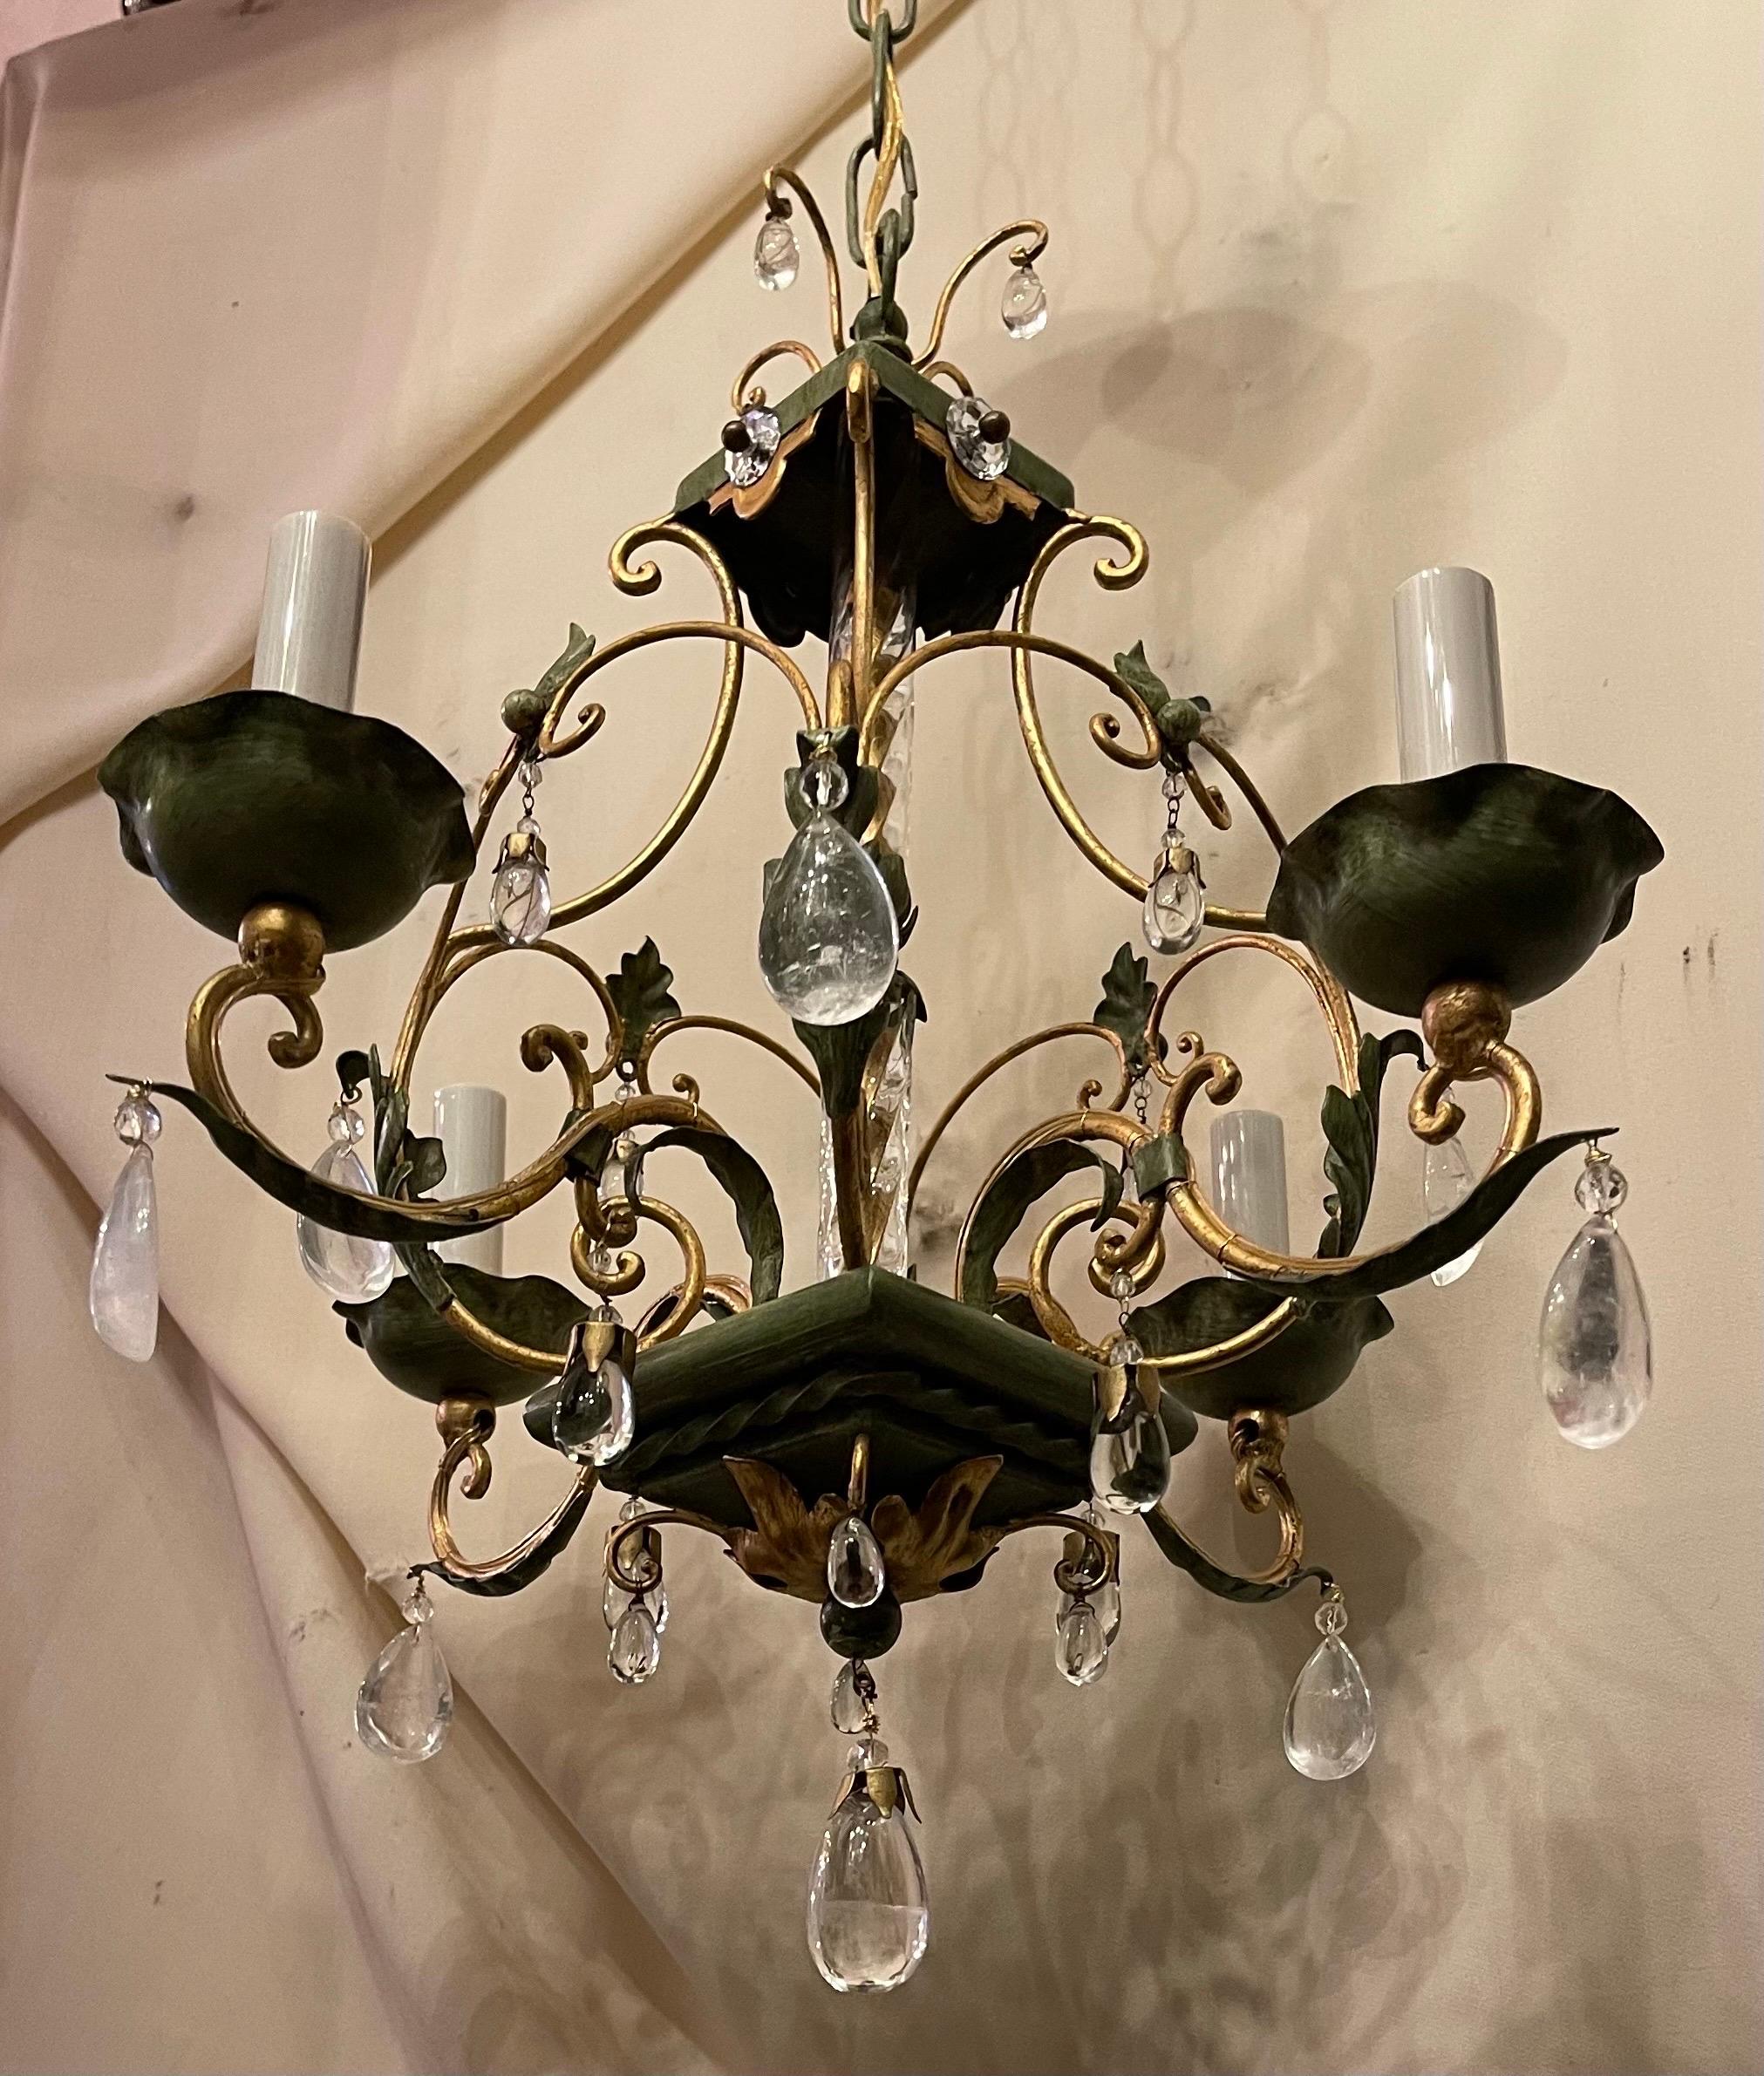 Wonderful Petite Four Light Maison Baguès Rock Crystal Tole French Chandelier In Good Condition For Sale In Roslyn, NY